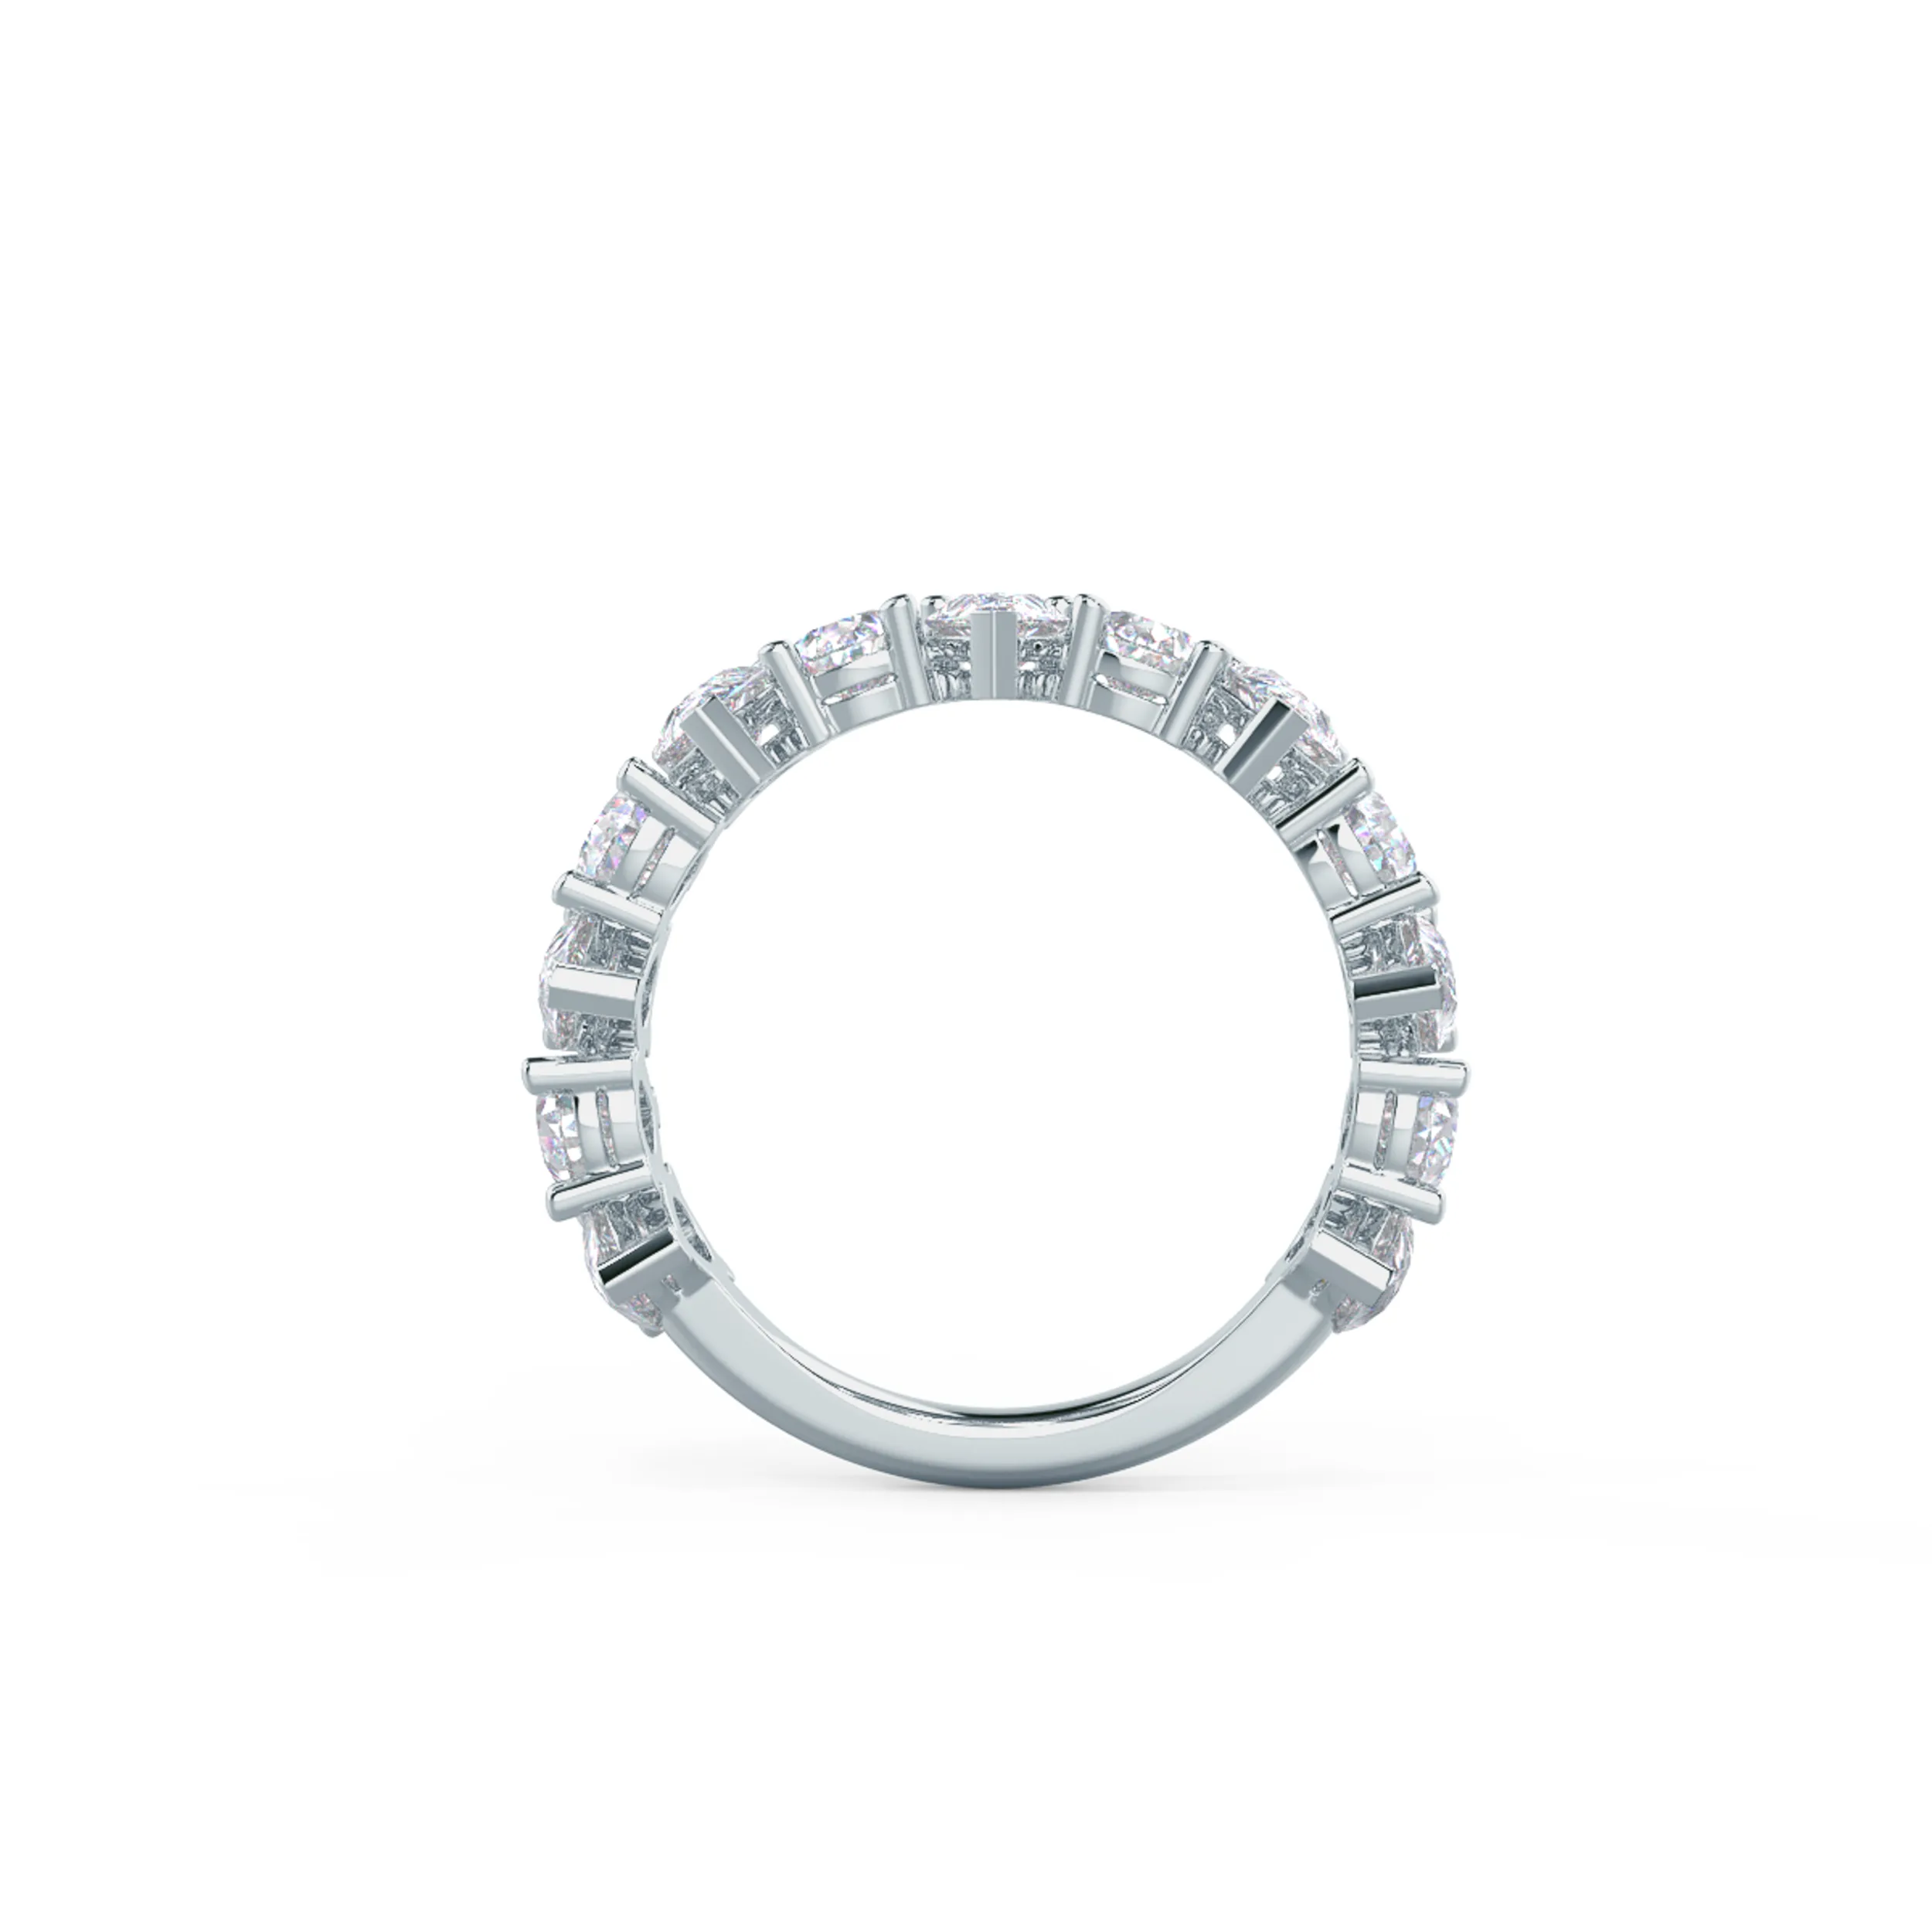 18k White Gold Pear Alternating Three Quarter Band featuring High Quality 2.75 Carat Lab Created Diamonds (Profile View)